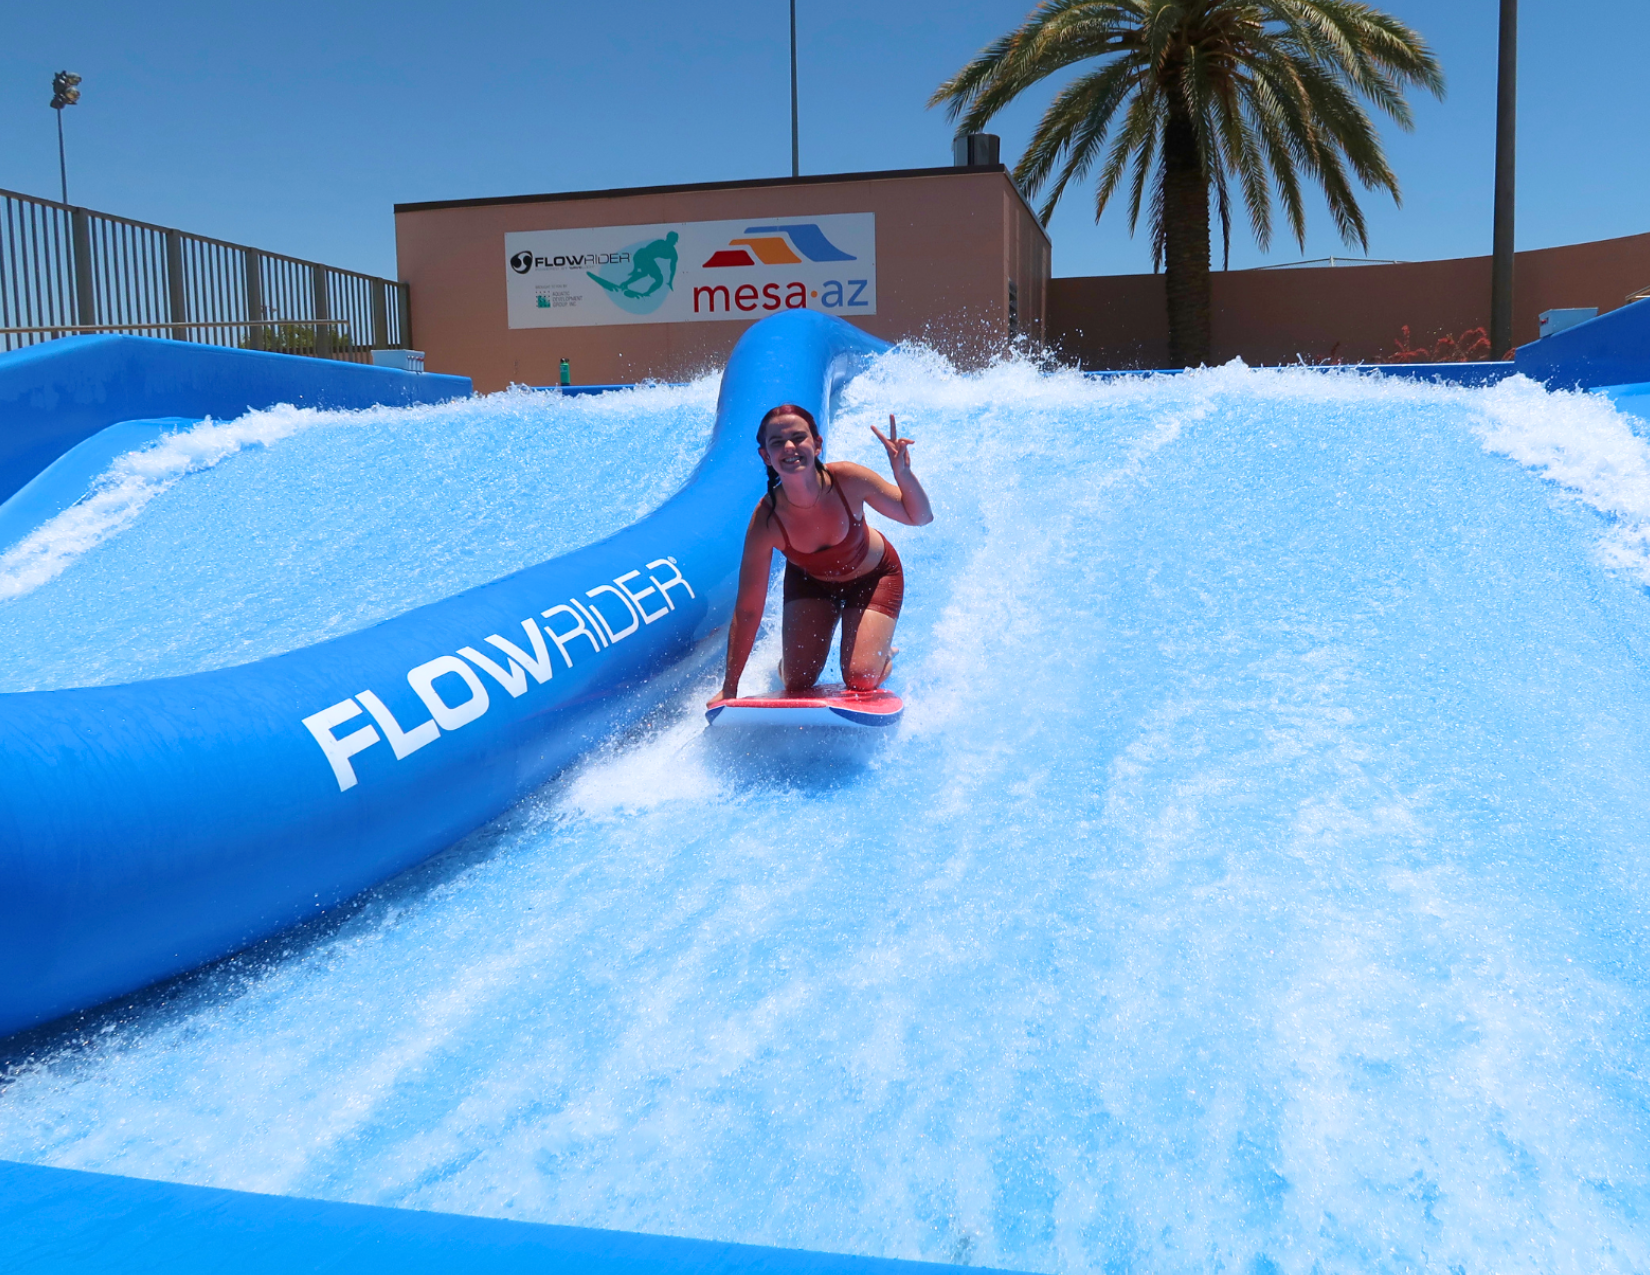 Lacy Cain Baranack surfing on the flowrider, a surfing simulation, in Mesa, Arizona